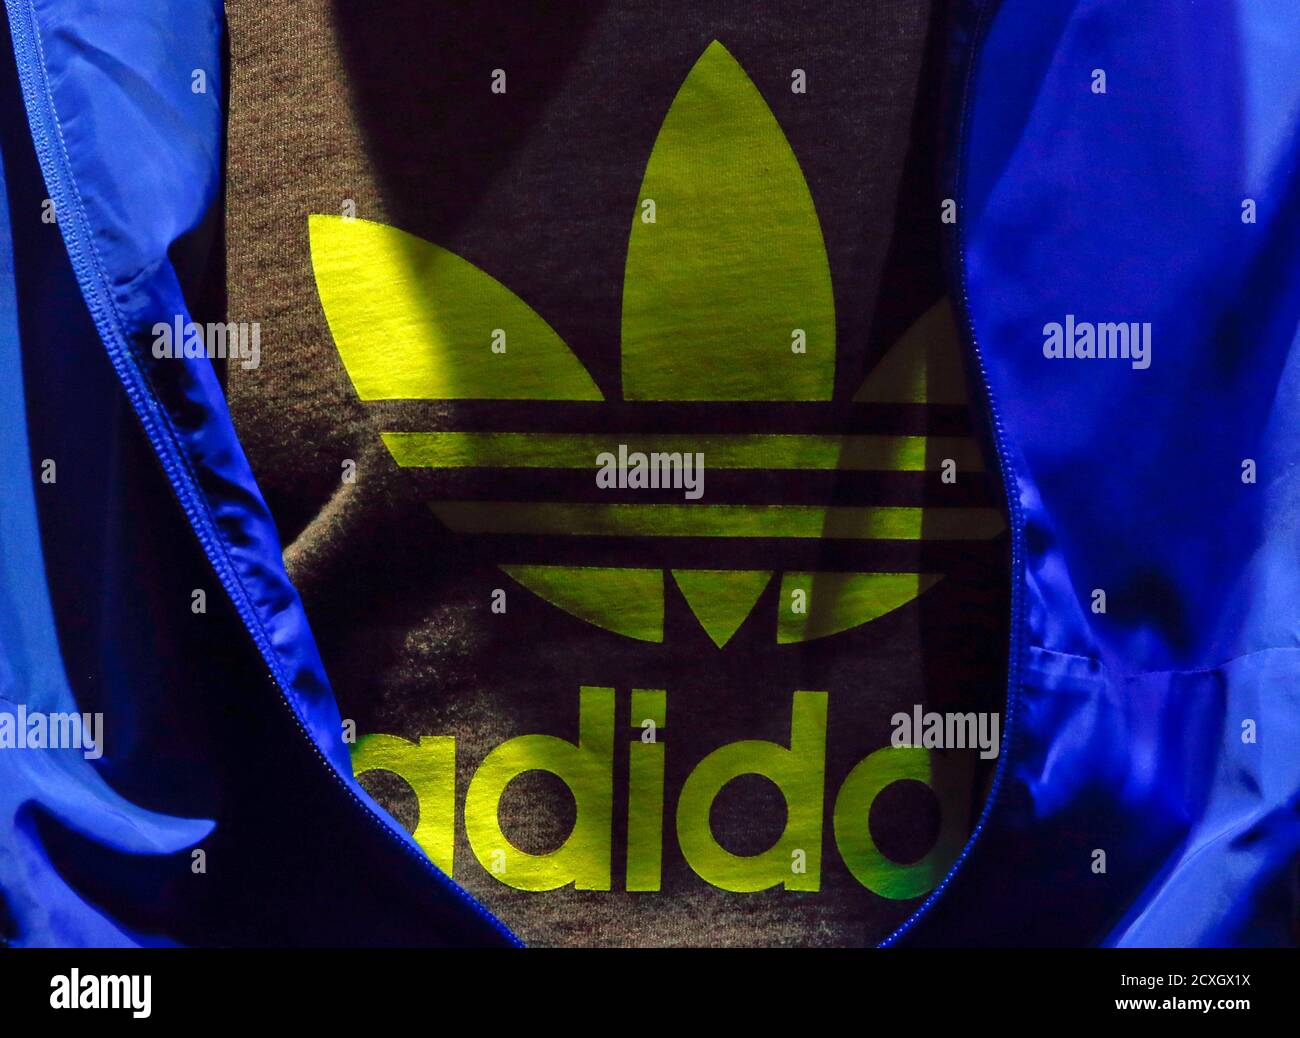 Maryanne Jones limpiar playa The Adidas logo is pictured on a shirt during the company's annual news  conference in Herzogenaurach March 7, 2013. Adidas, the world's second  largest sports apparel firm, reported an unexpected loss in